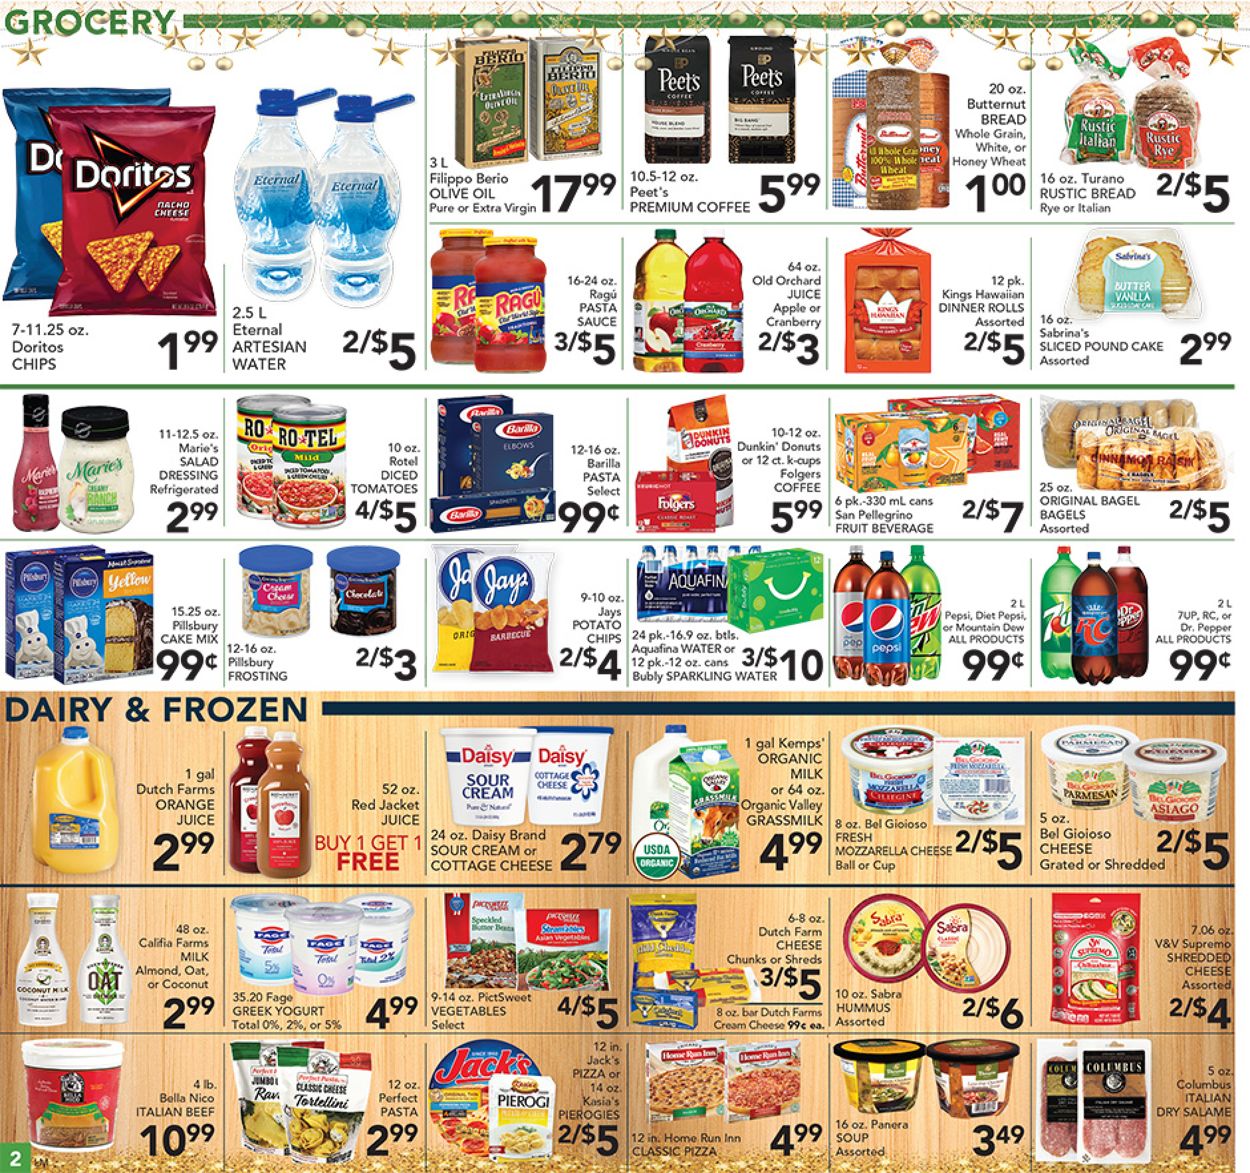 Catalogue Pete's Fresh Market - New Year's Ad 2019/2020 from 12/26/2019